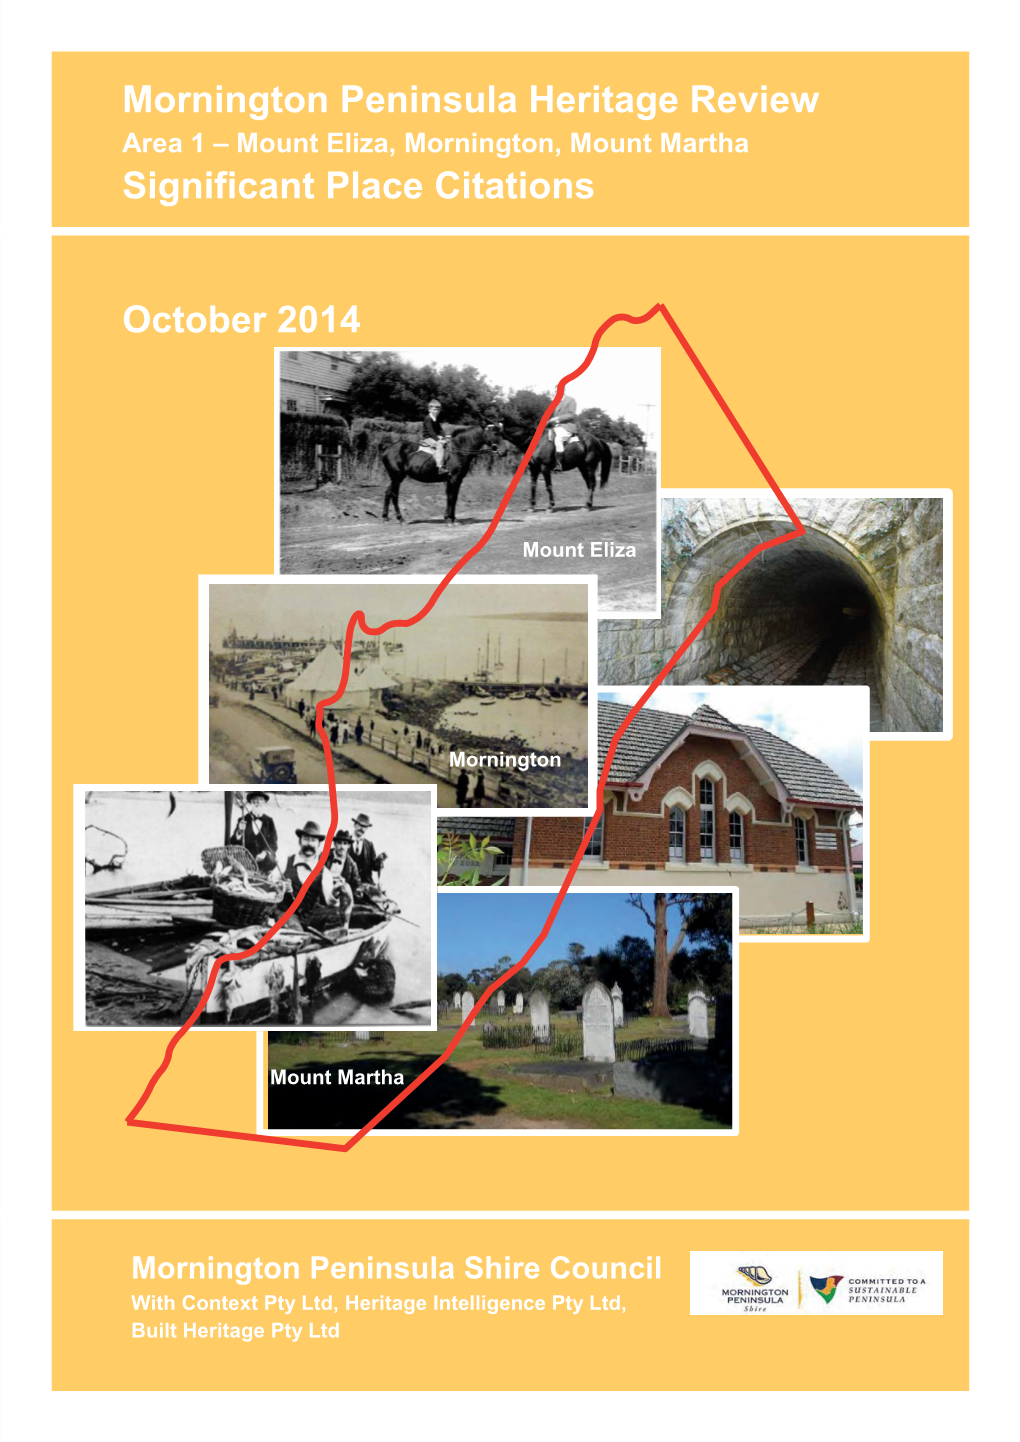 Mornington Peninsula Heritage Review Significant Place Citations October 2014